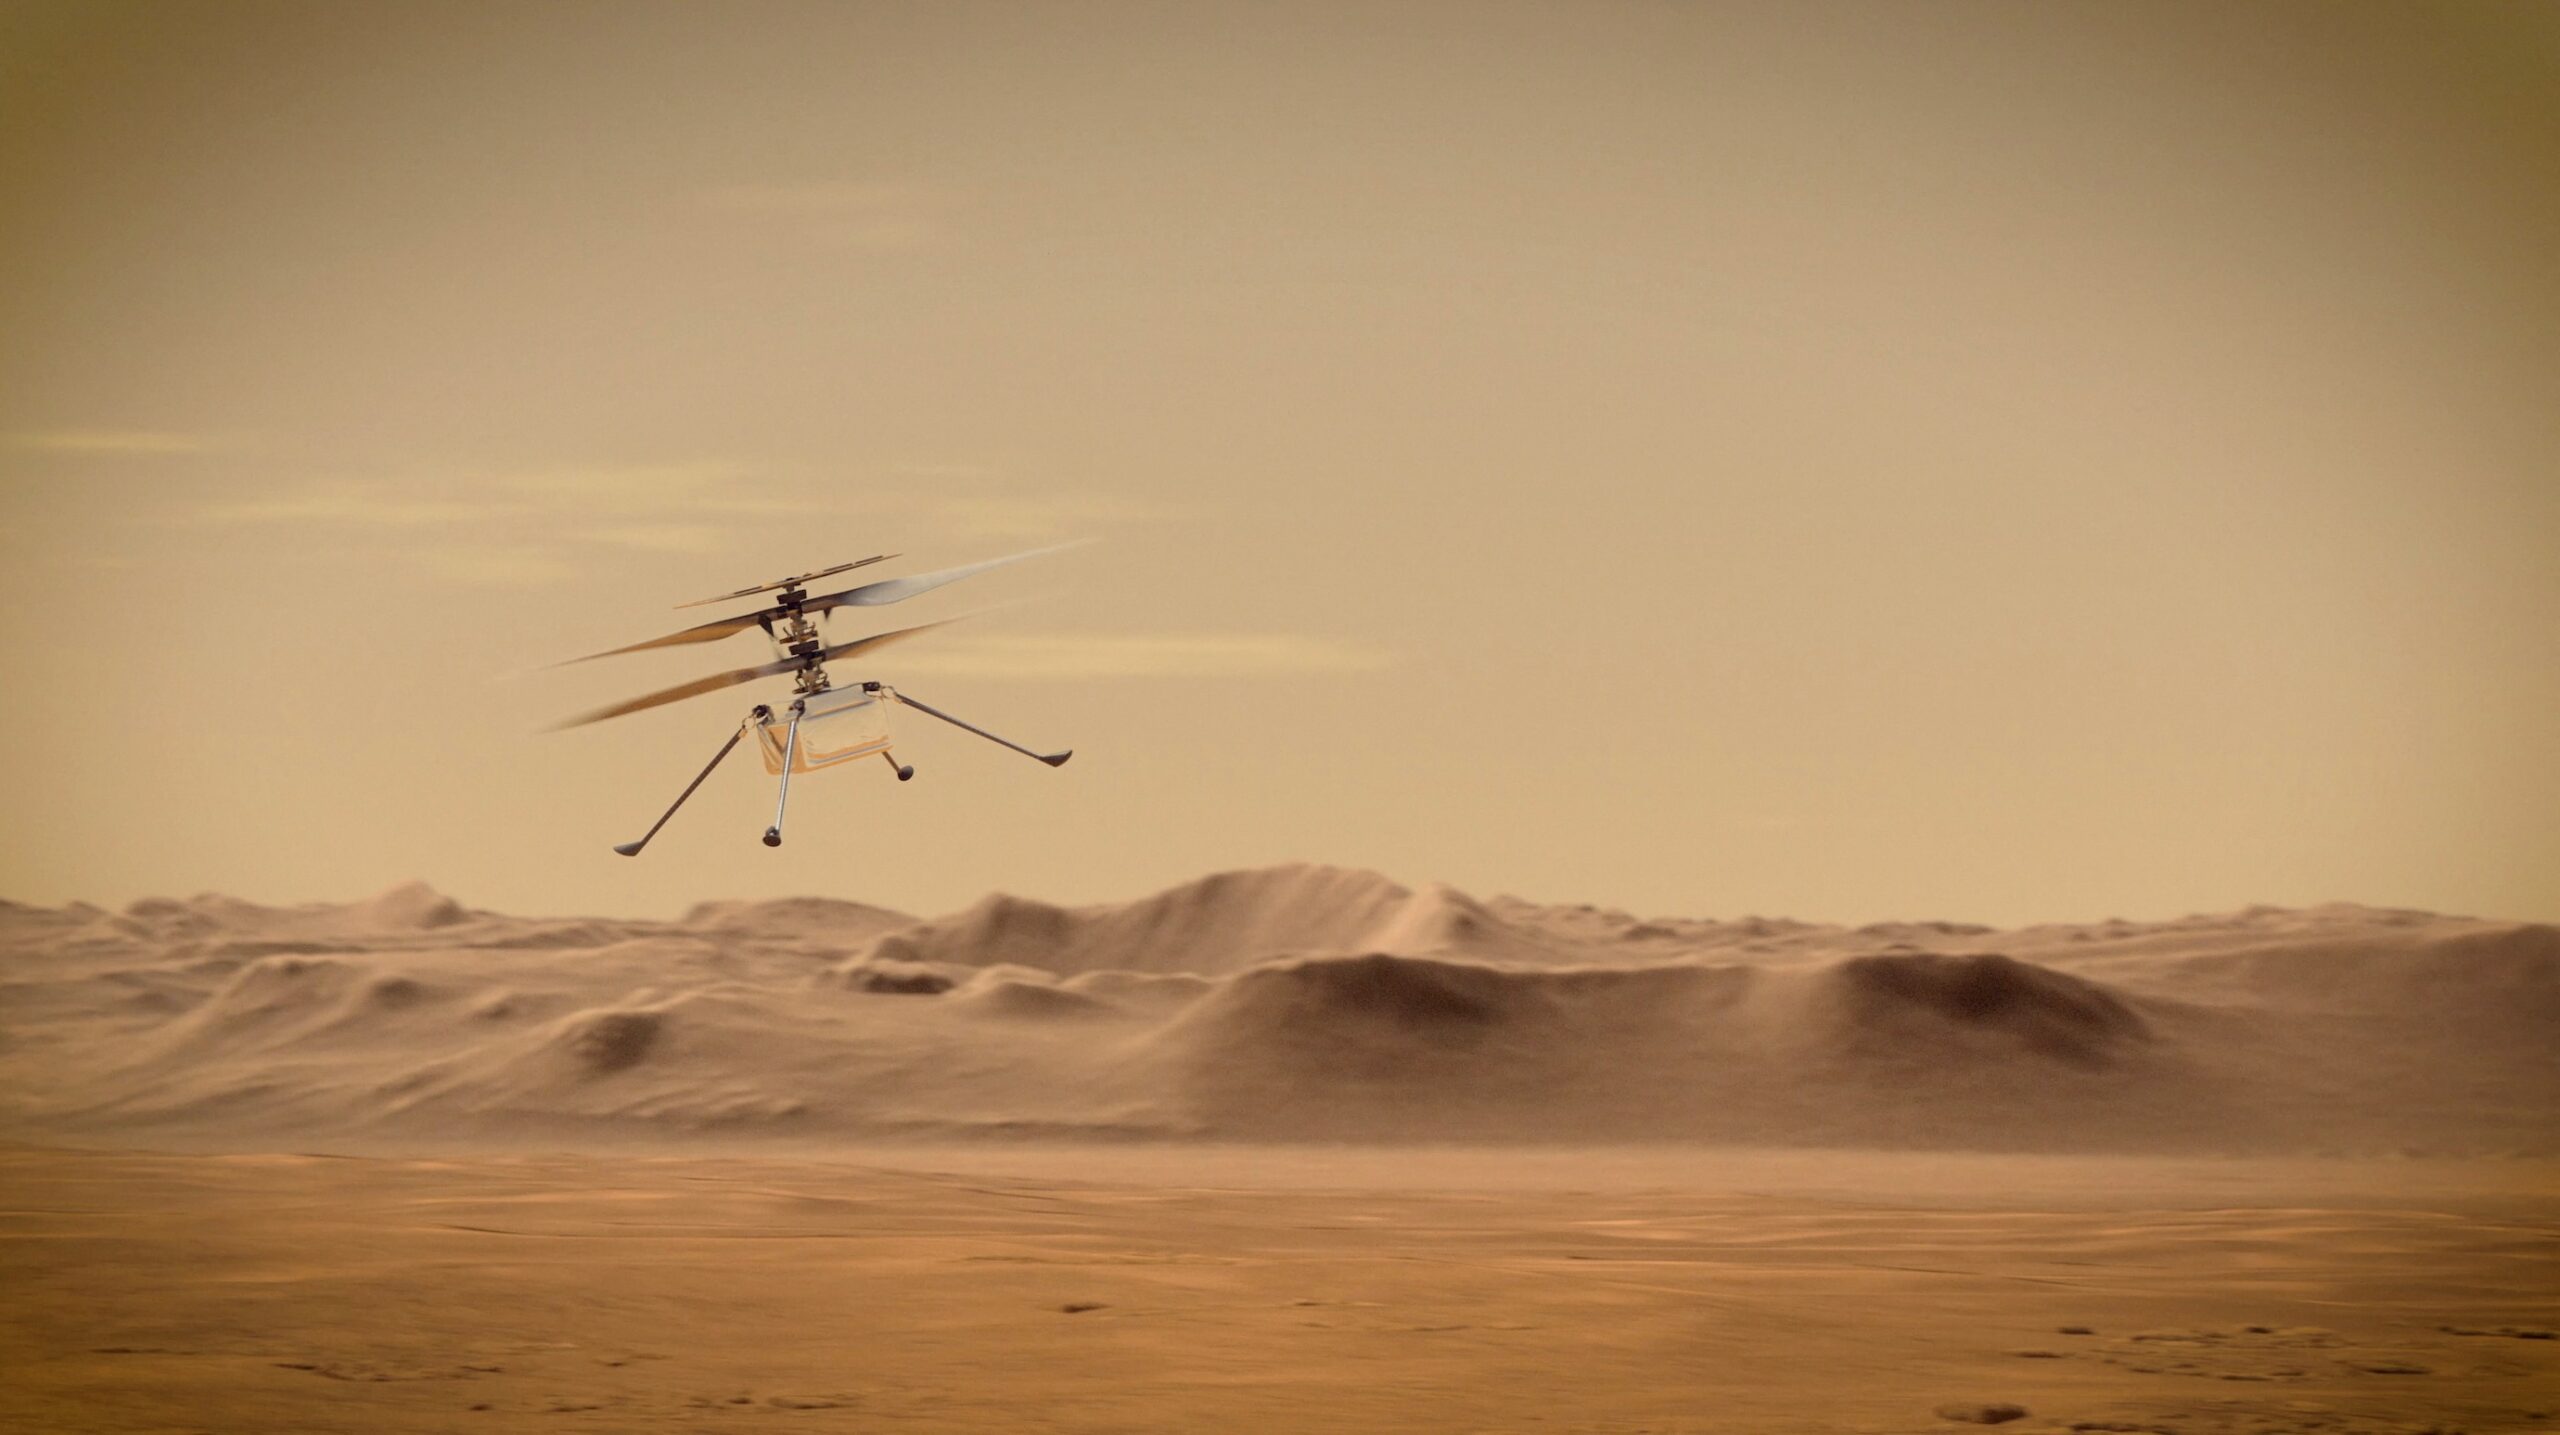 NASA’s historic Mars helicopter Ingenuity grounded for good after 72 flights